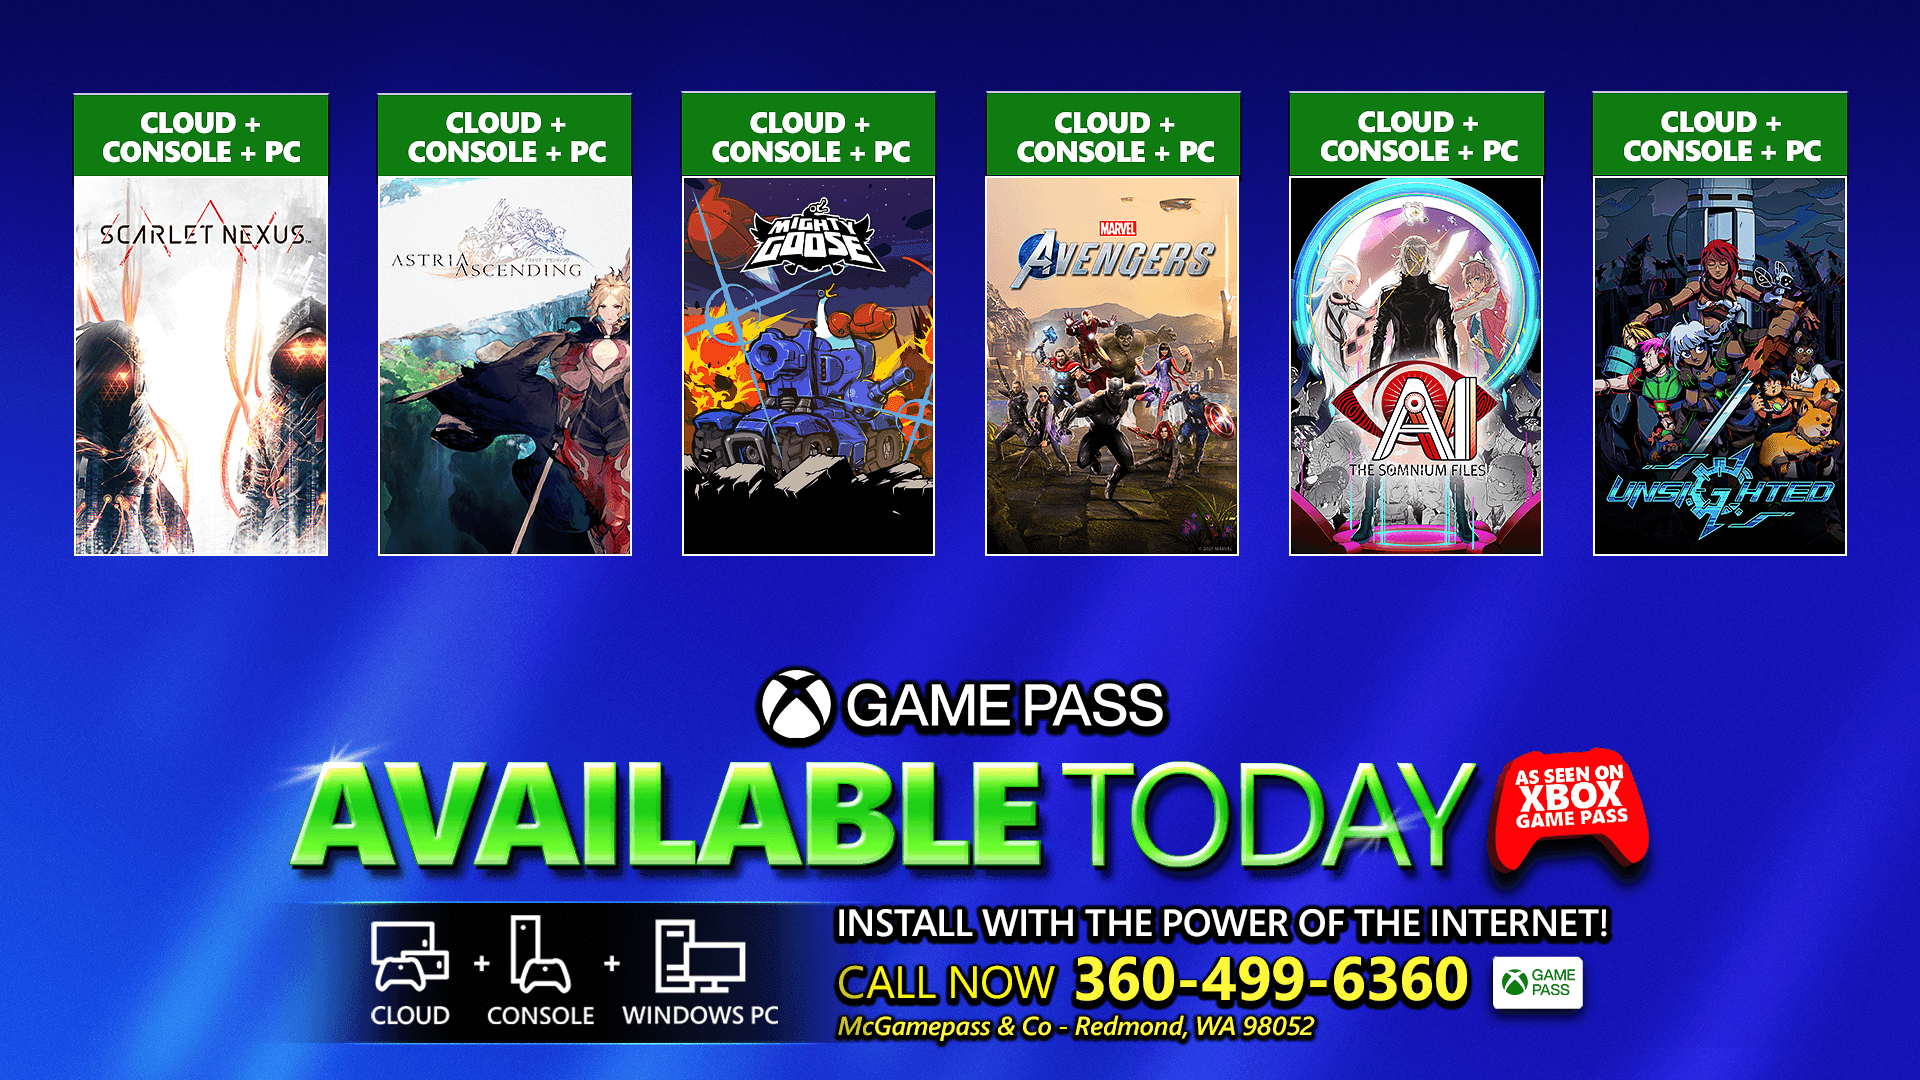 "Crimson Knot" and "Astria Ascending" landed on Xbox Game Pass along with "Marvel Avengers" thumbnail